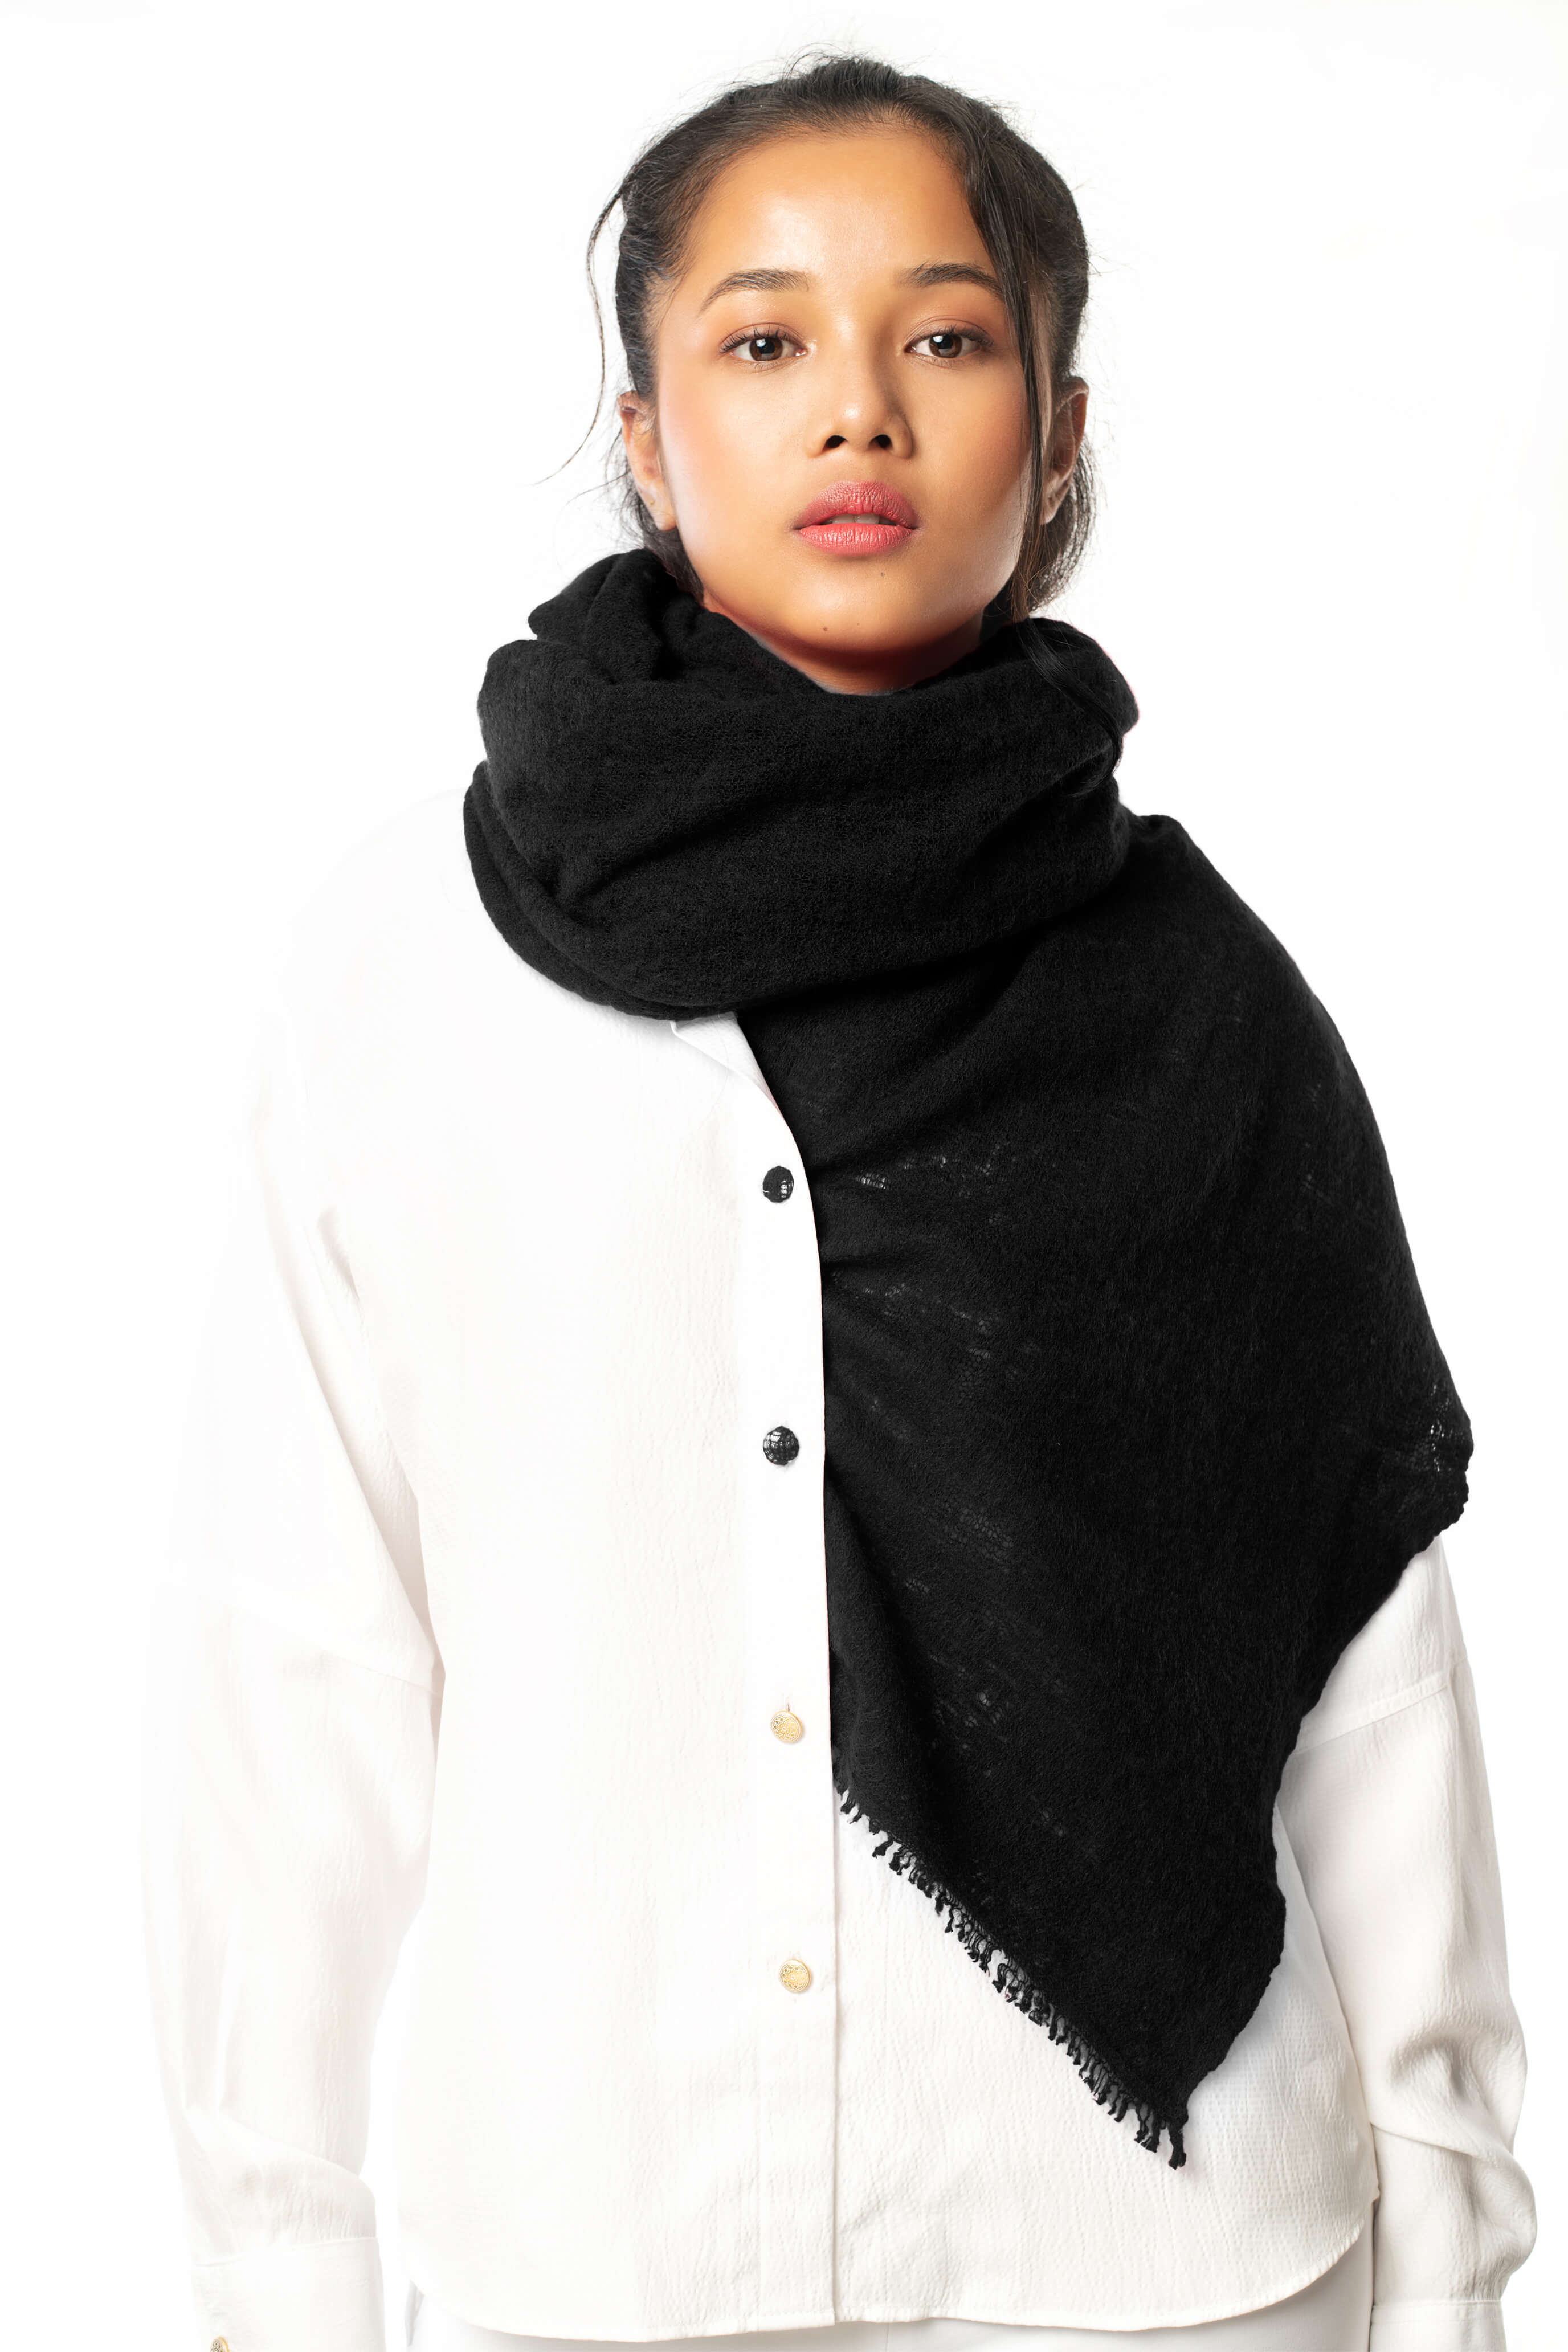 Premium Black and White Cashmere Scarves Collection